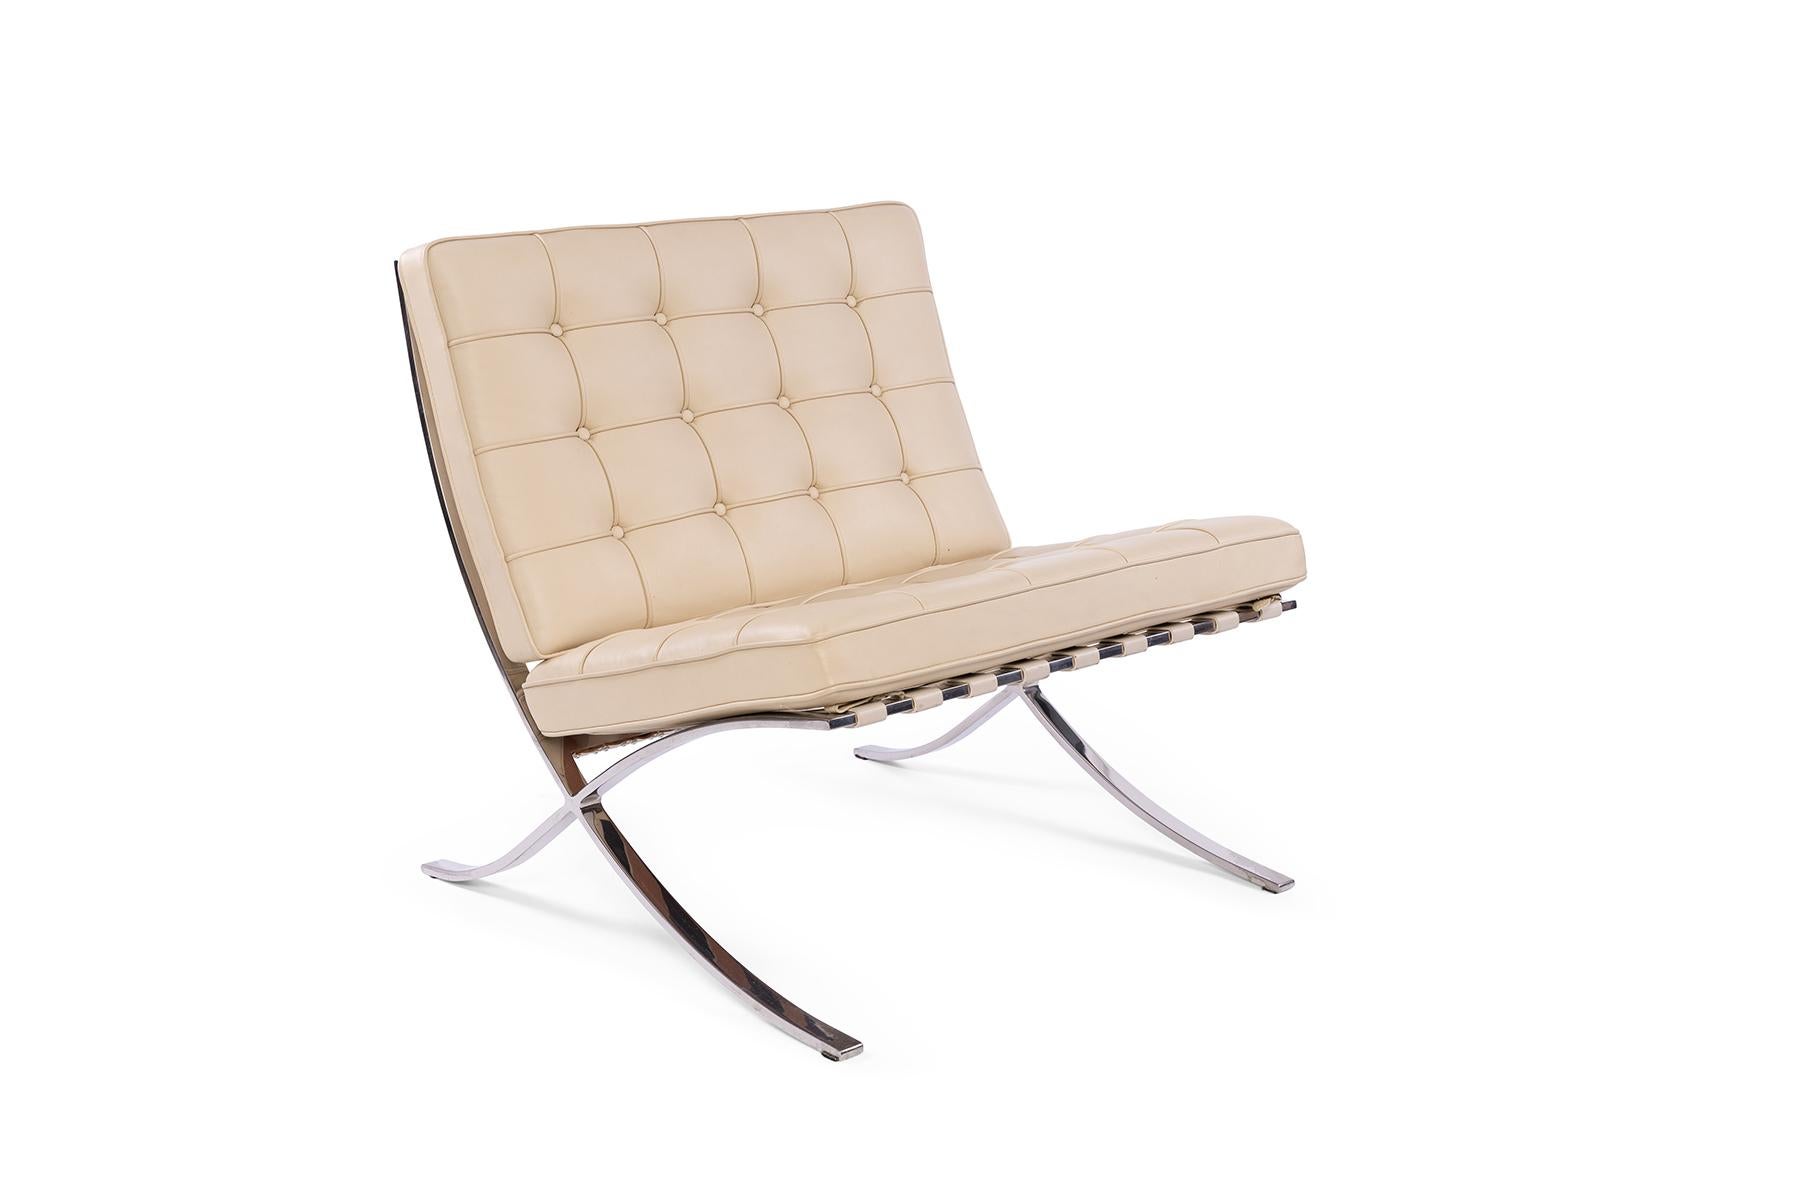 Mies Van Der Rohe for Knoll pair of stainless steel and leather Barcelona chairs circa early 1990’s. These examples are in excellent original condition and priced as a pair.
  